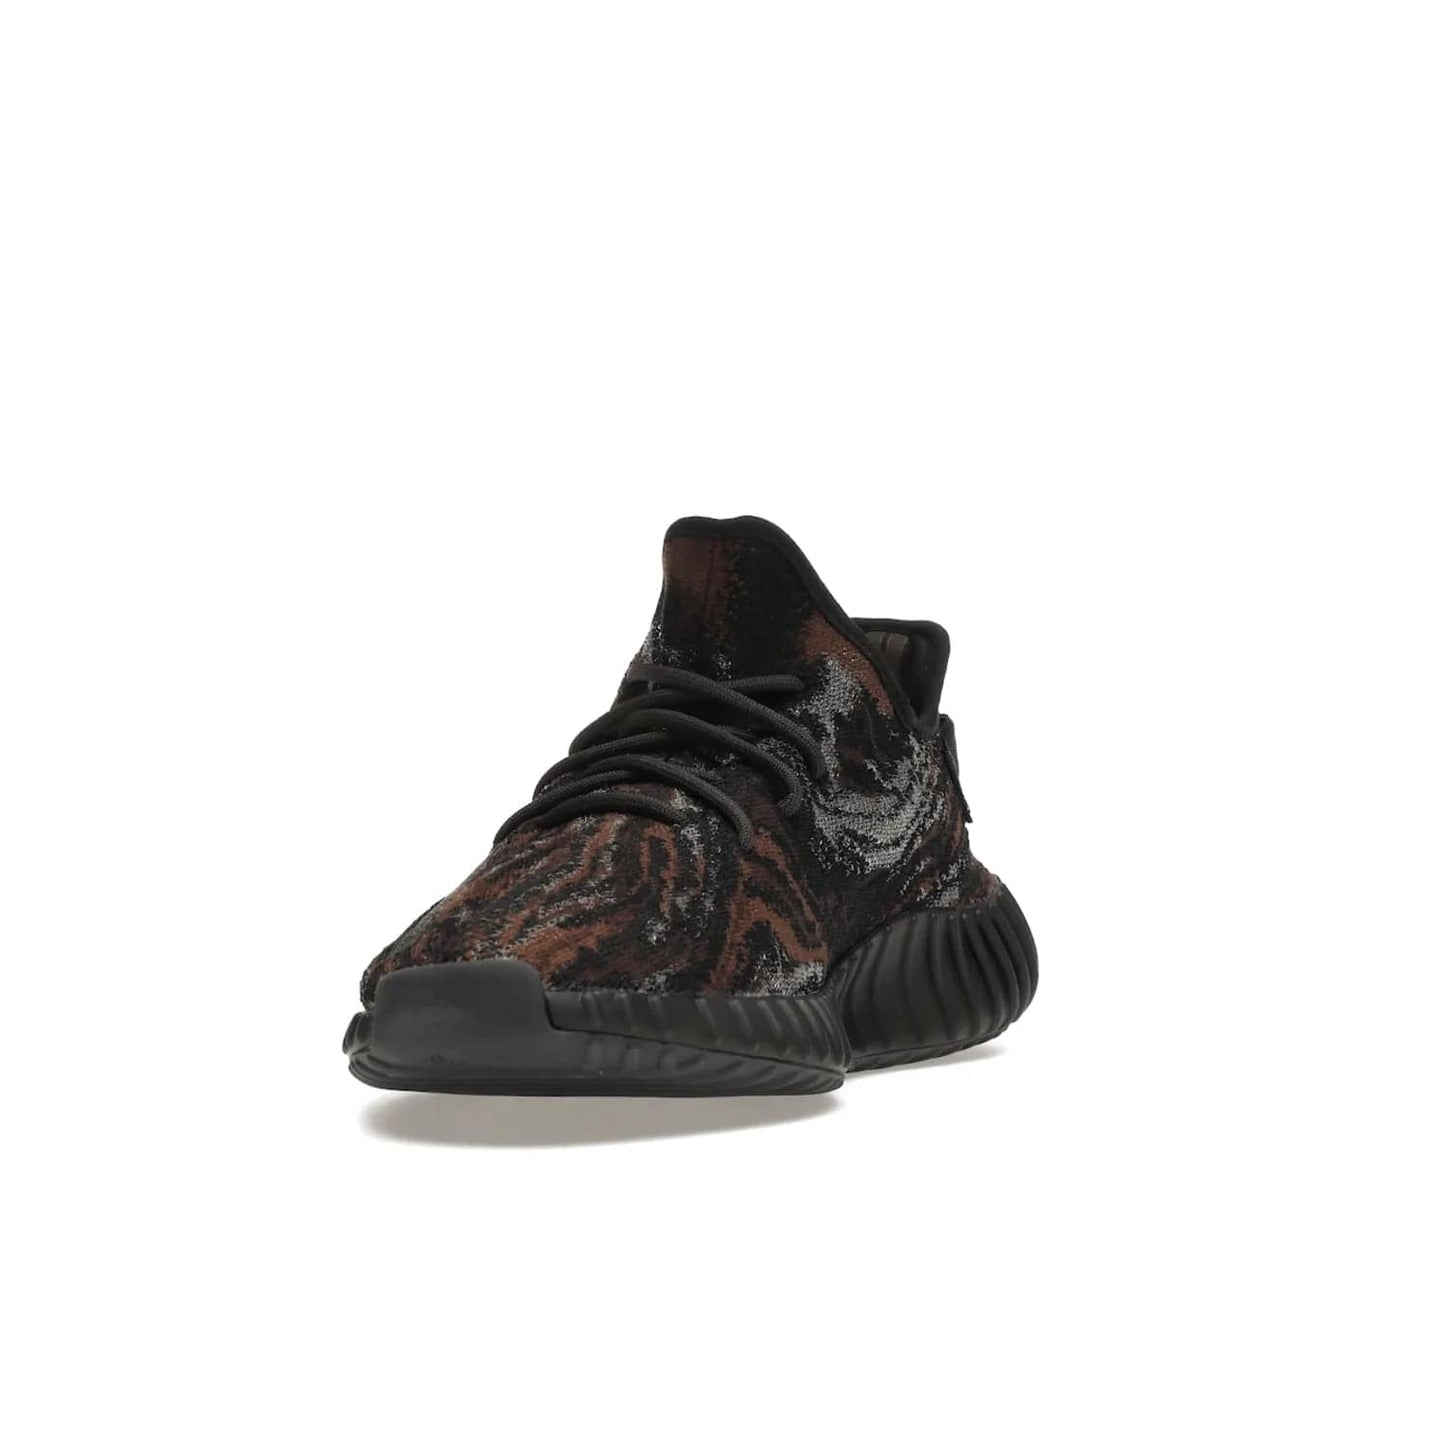 adidas Yeezy Boost 350 V2 MX Rock - Image 13 - Only at www.BallersClubKickz.com - The adidas Yeezy Boost 350 V2 MX Rock features a stylish marbled upper of black, grey, and brown tones. Shop the signature Boost sole, heel tab, and mesh side stripe now, available December of 2021.